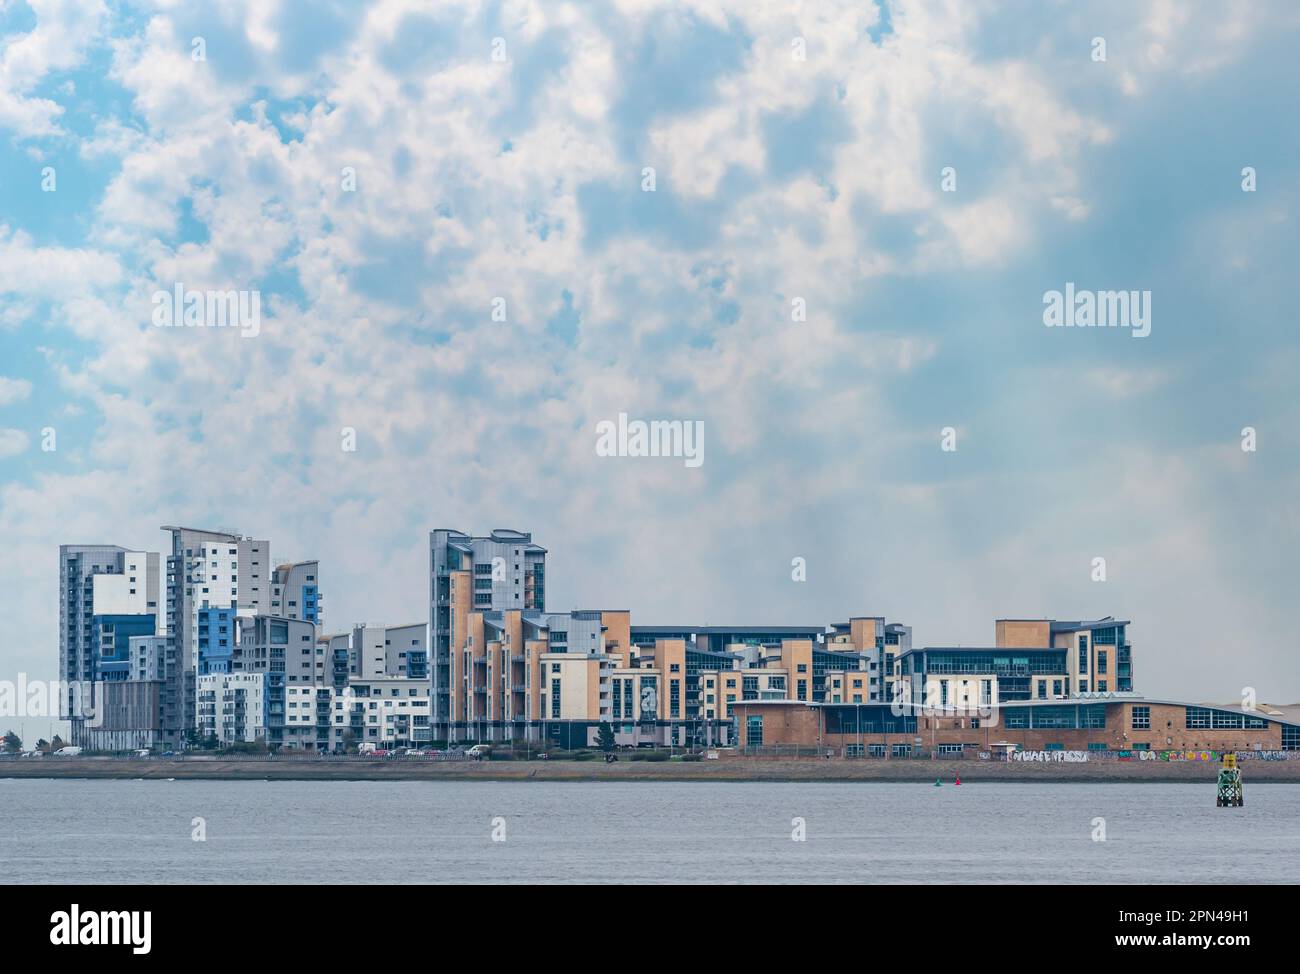 View from a distance of modern high rise apartment buildings at Platinum Point, Edinburgh, Scotland, UK Stock Photo